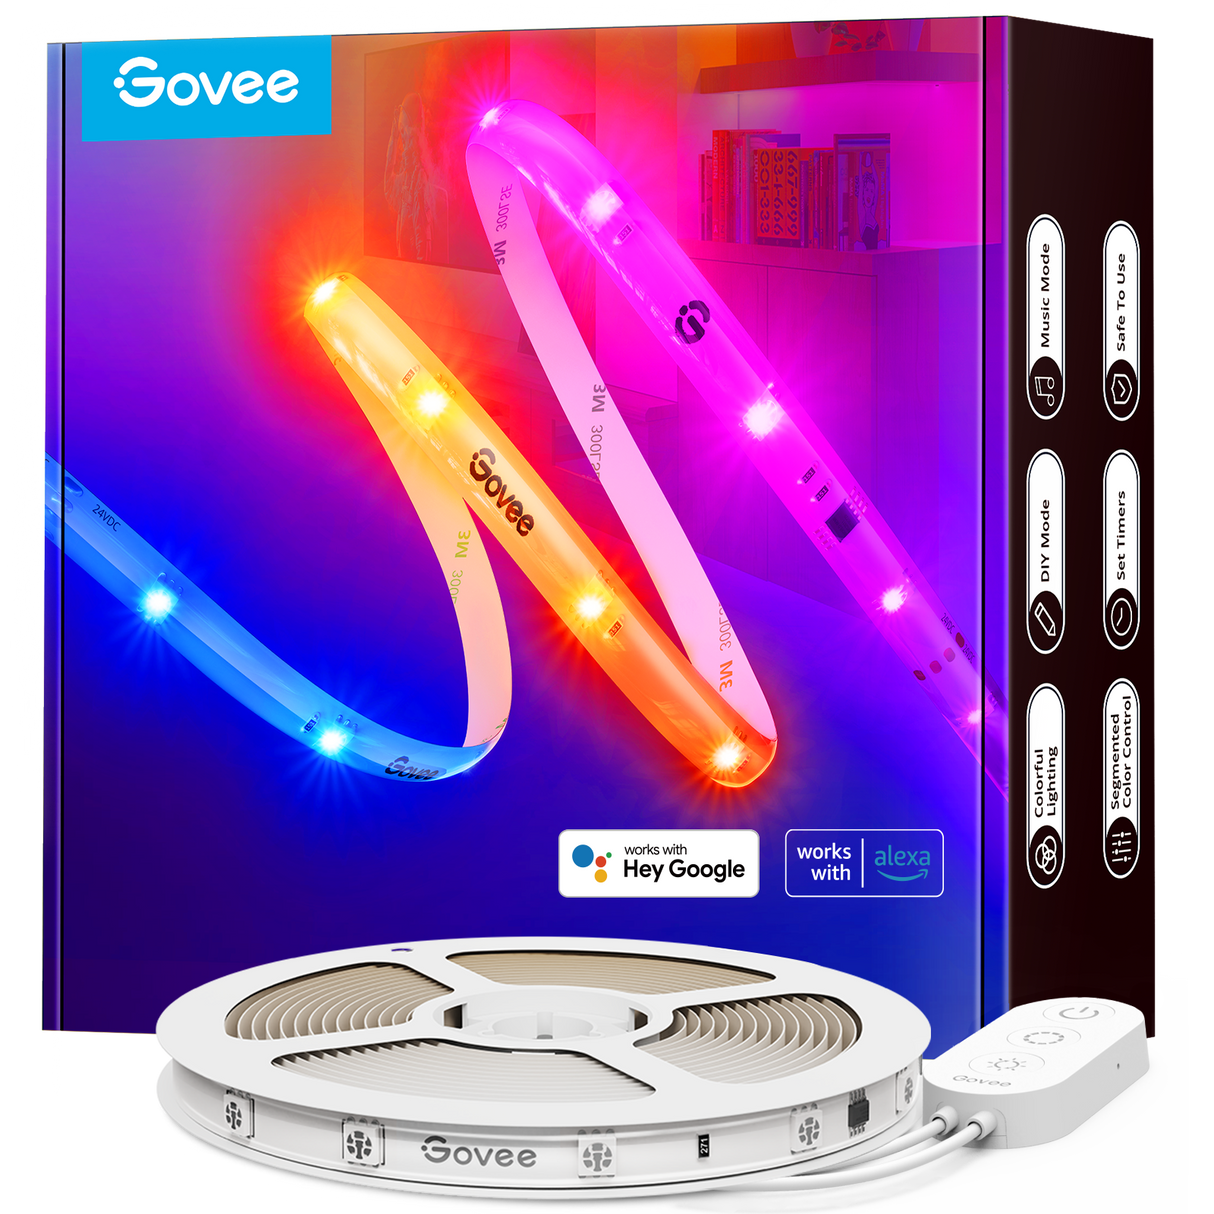 Govee Alexa LED Strip Lights 5m, Smart WiFi App Control, Works with Alexa  and Google Assistant, Music Sync Mode, for Home TV Party Christmas